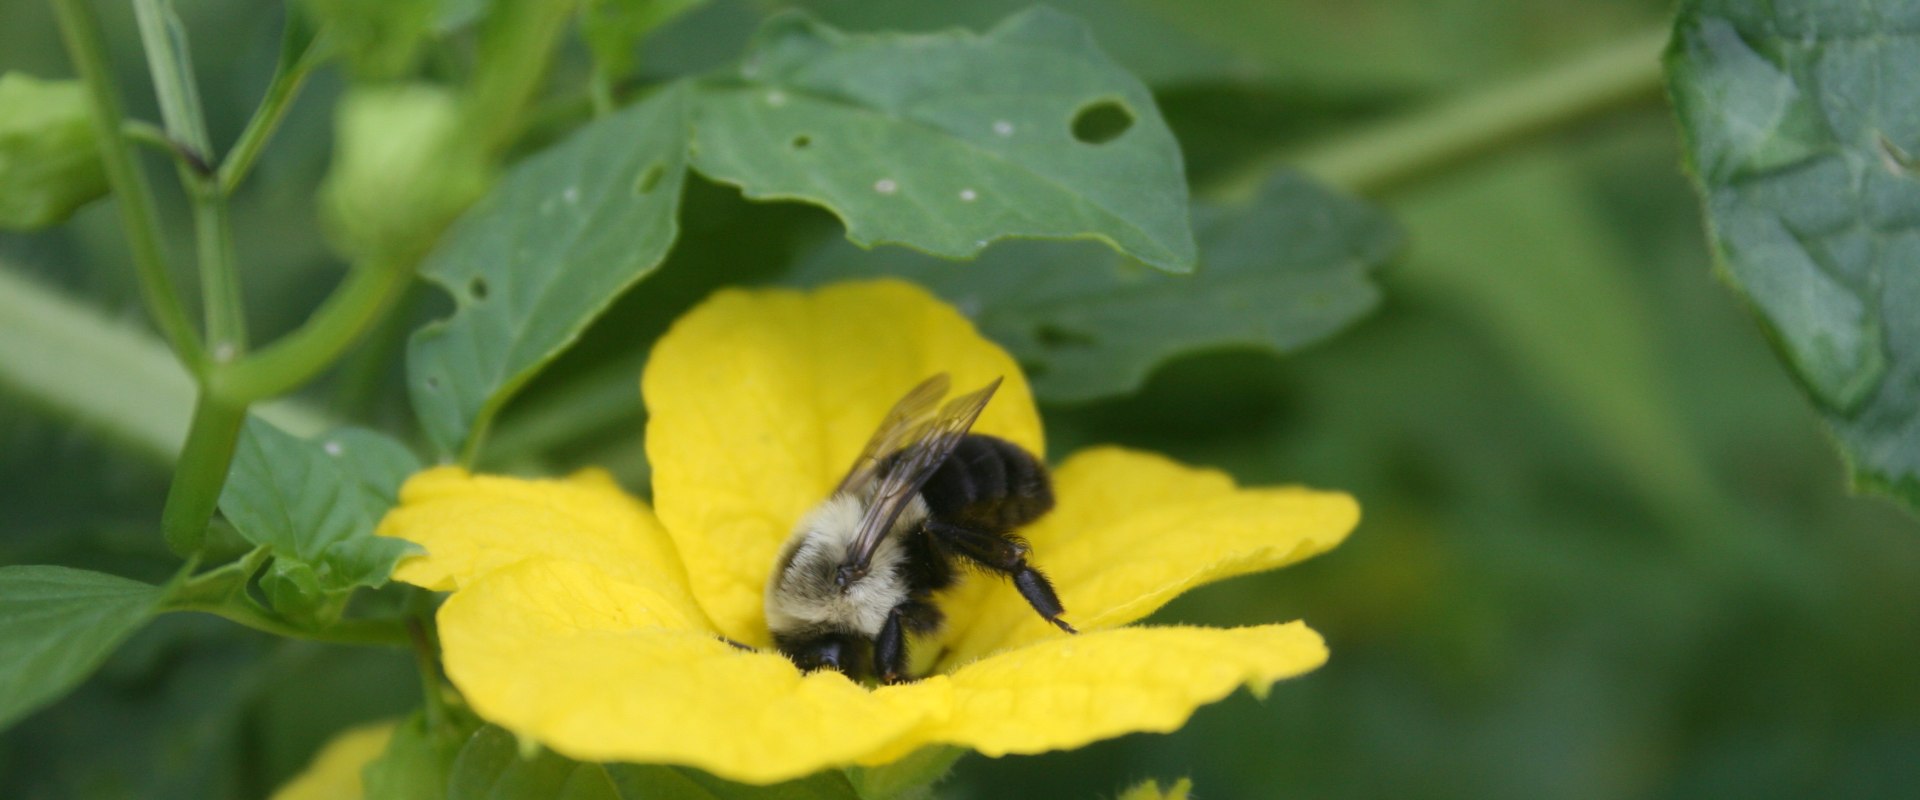 Removing Flowering Plants to Eliminate Bee Food Sources